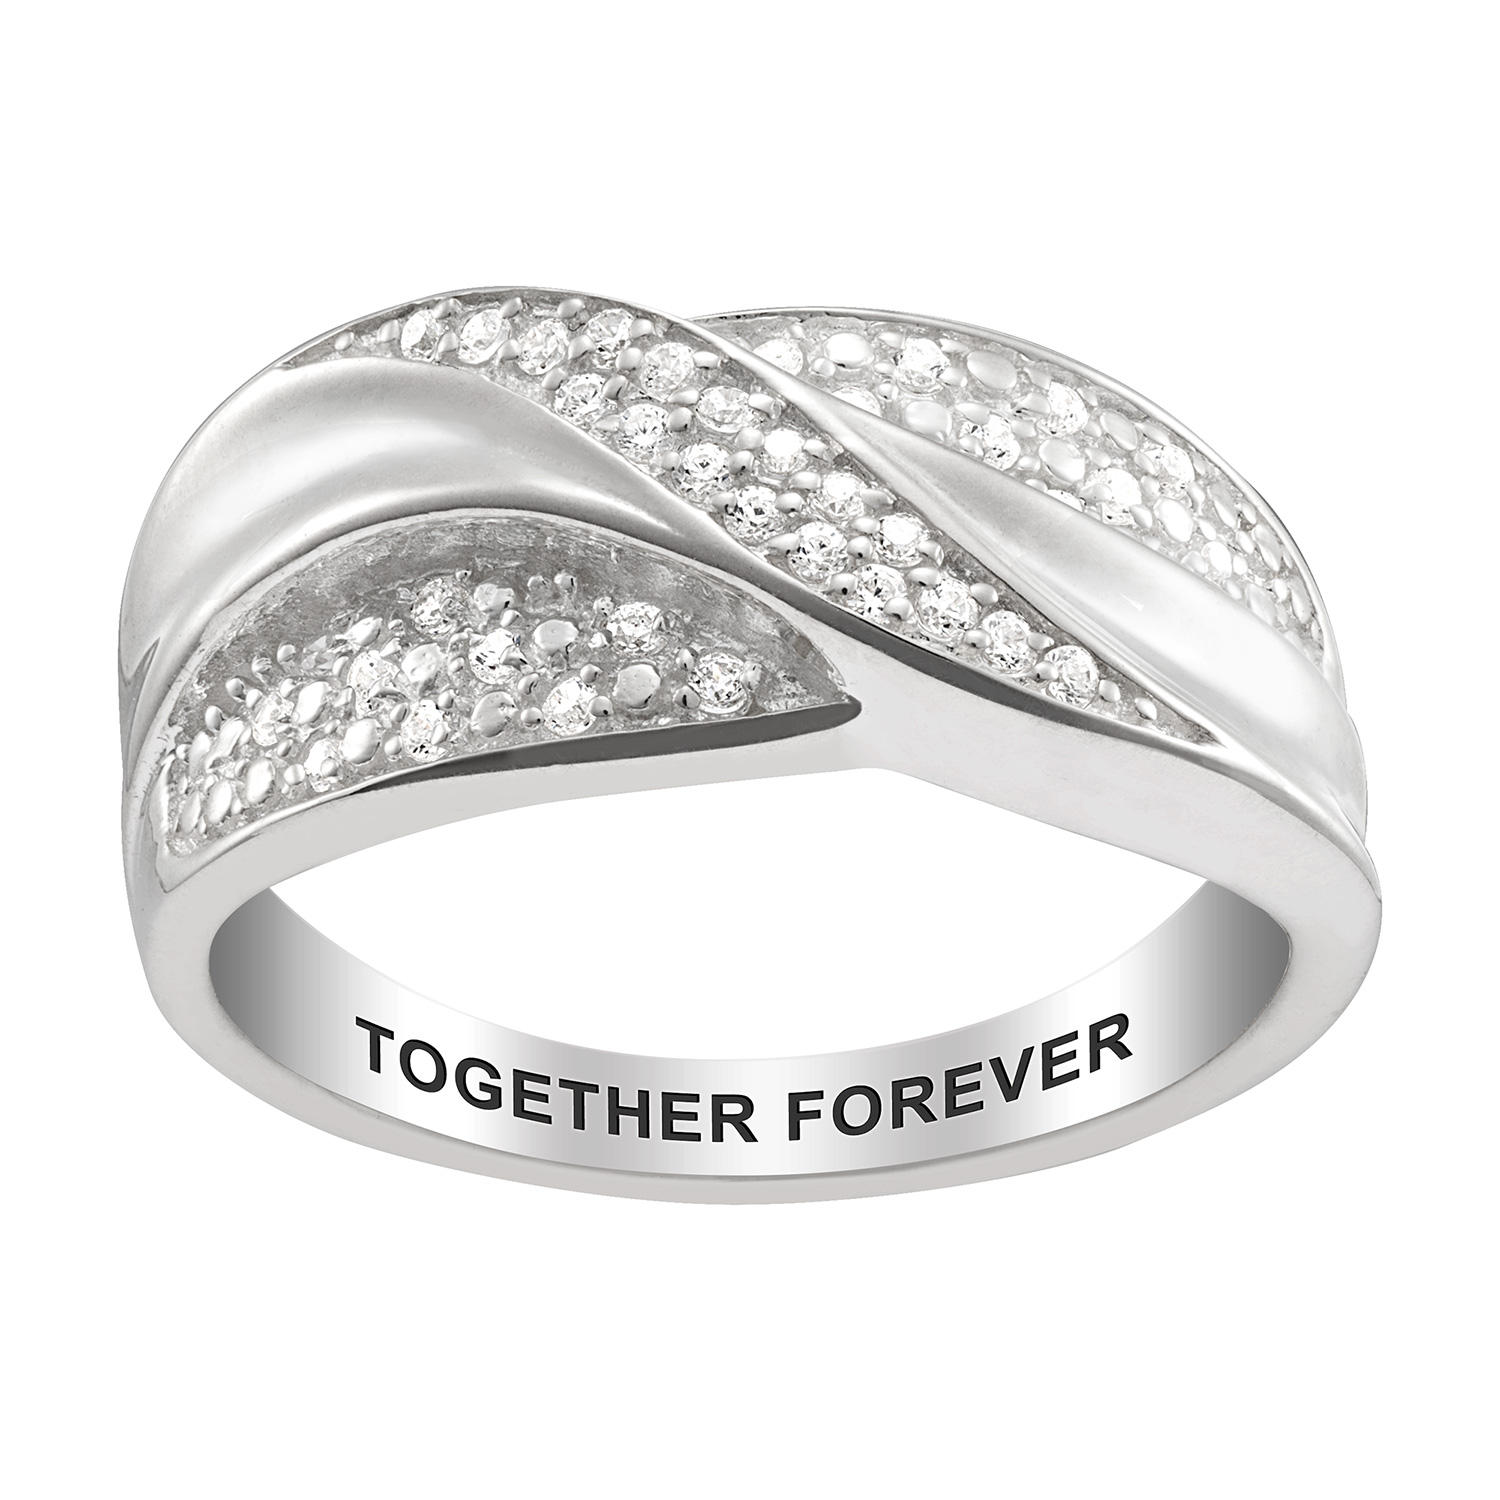 Sterling Silver Engraved Crossover CZ Ring